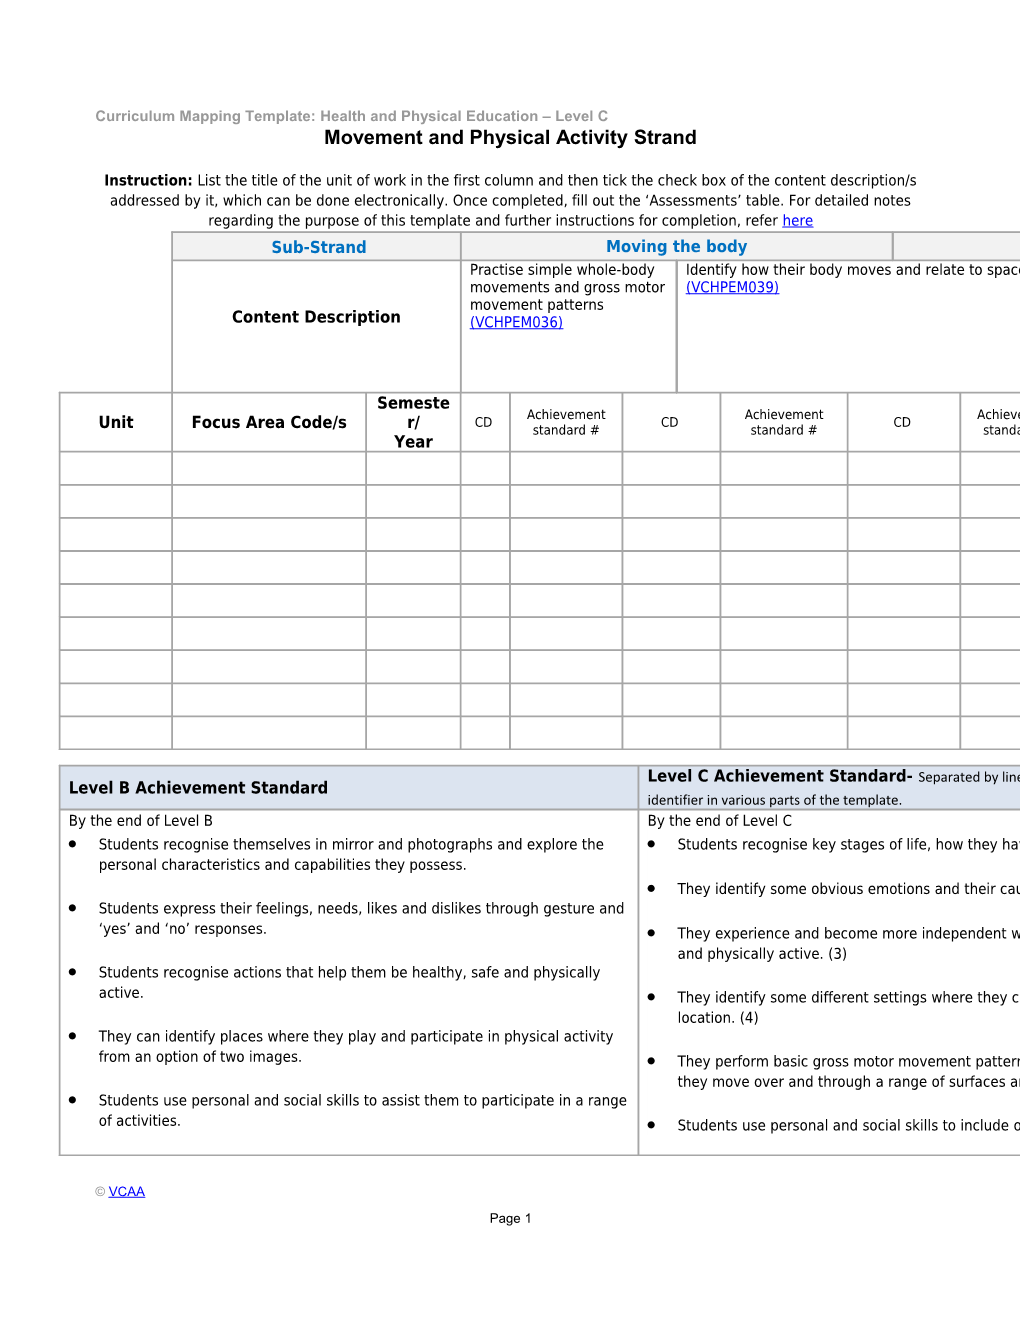 Curriculum Mapping Template: Health and Physical Education Level C